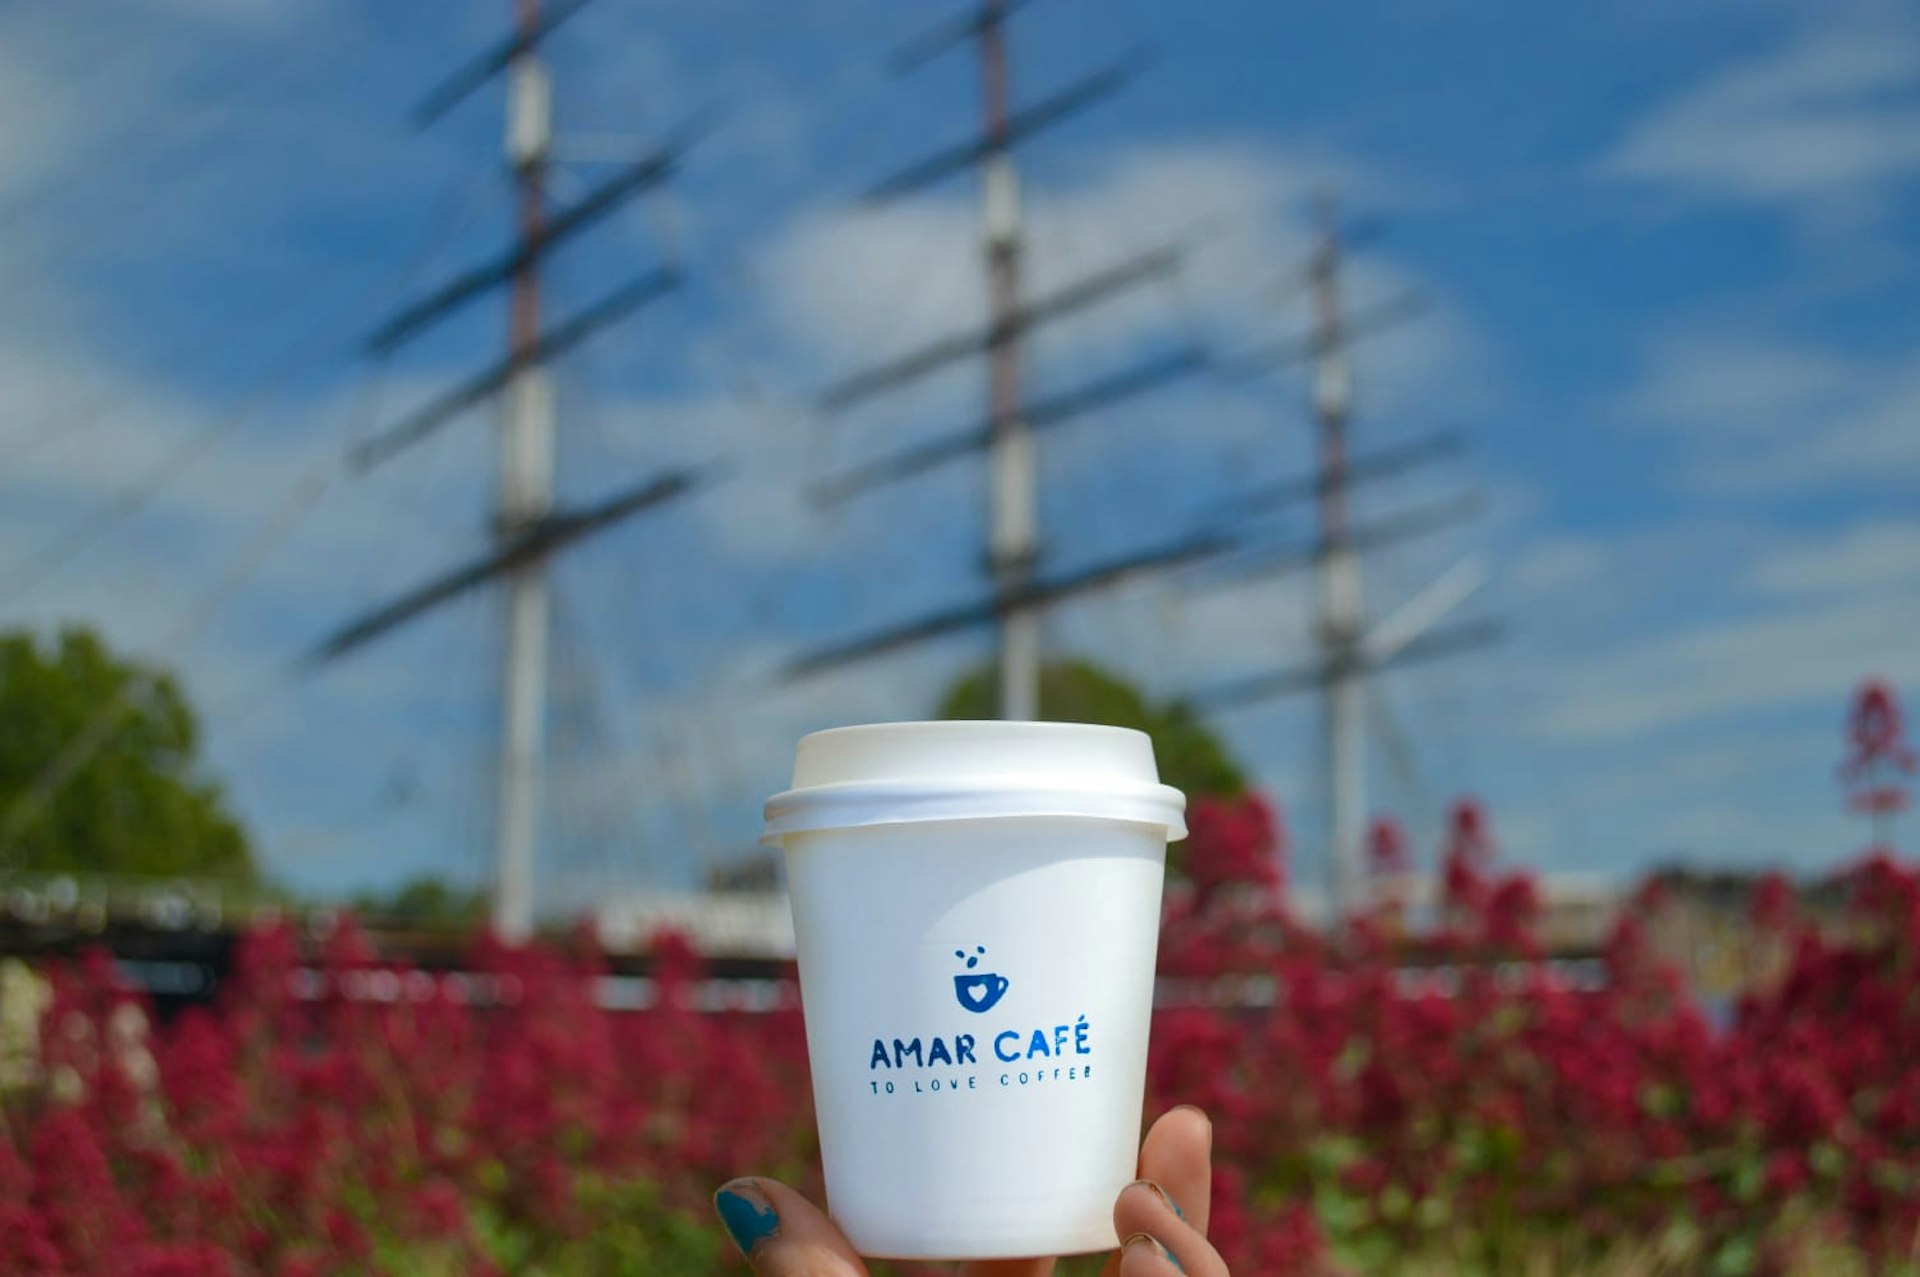 A takeaway coffee cup is held up against a blue sky backdrop